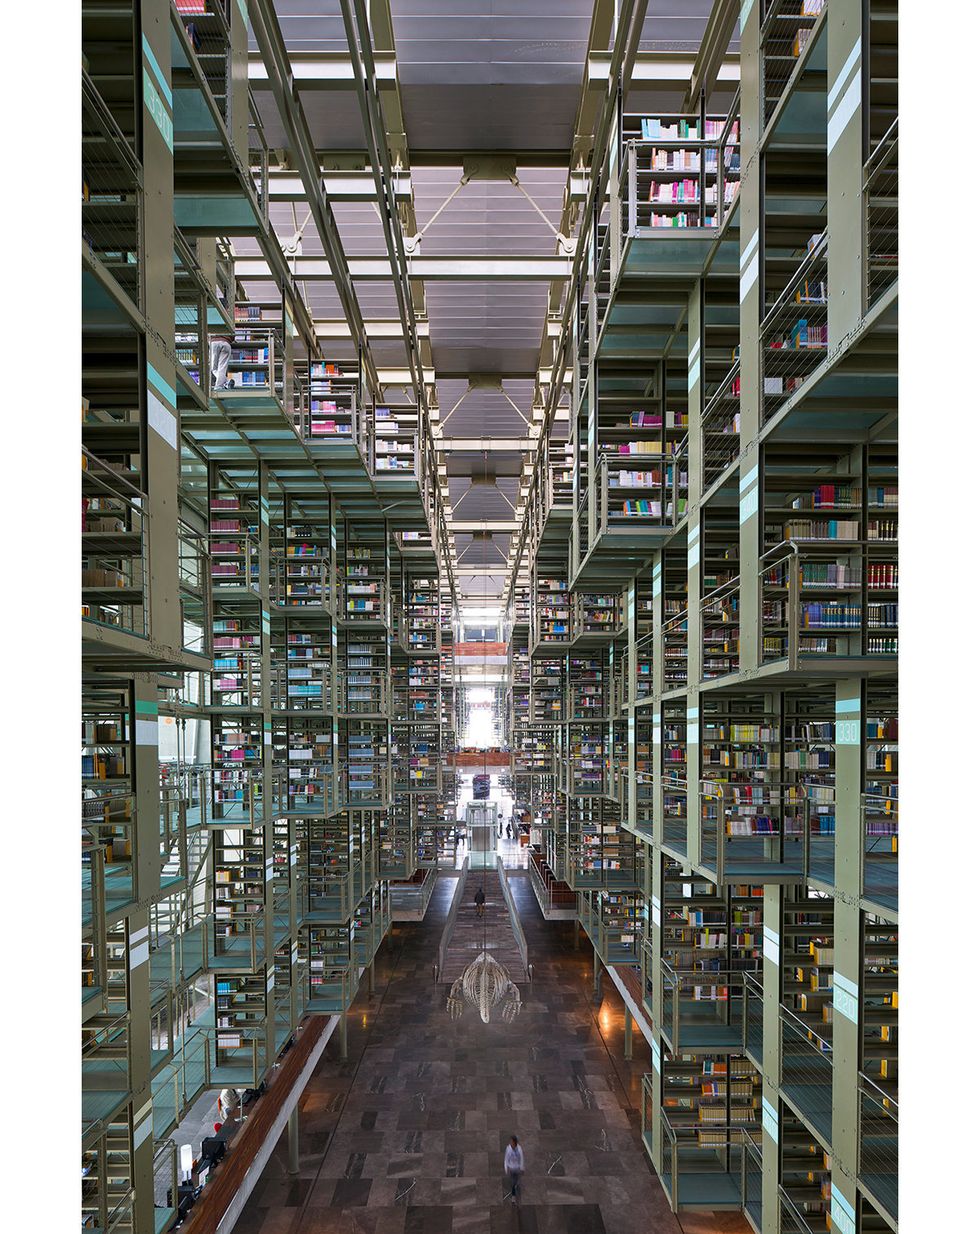 Aisle, Building, Architecture, Ceiling, Shelf, Floor, Glass, Inventory, Library, Warehouse, 